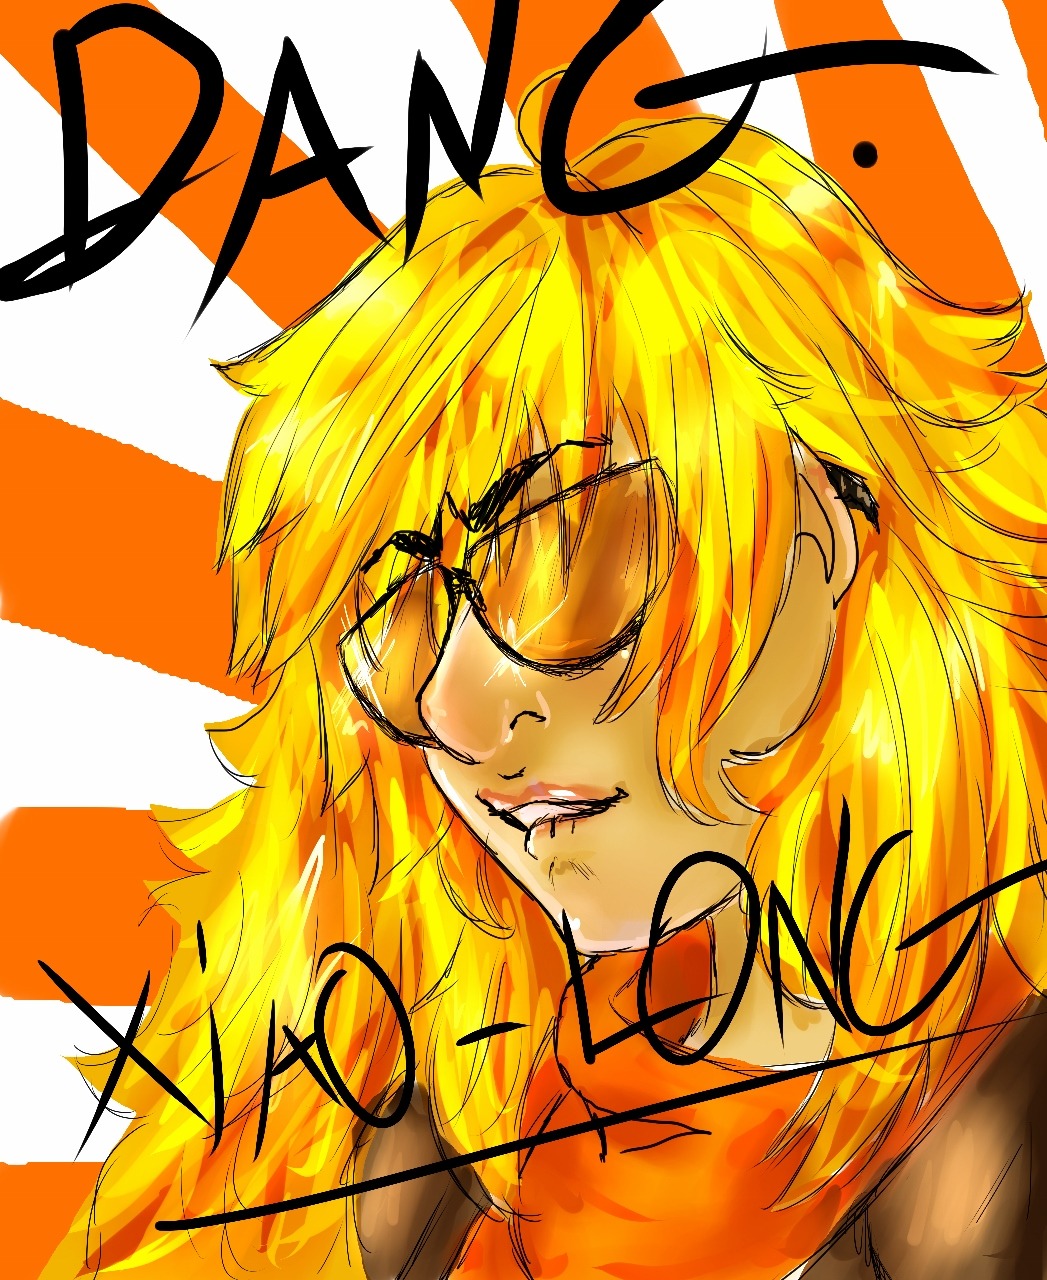 I needed to make an Icon cuz I&rsquo;m going to RP as Yang with Hana and this